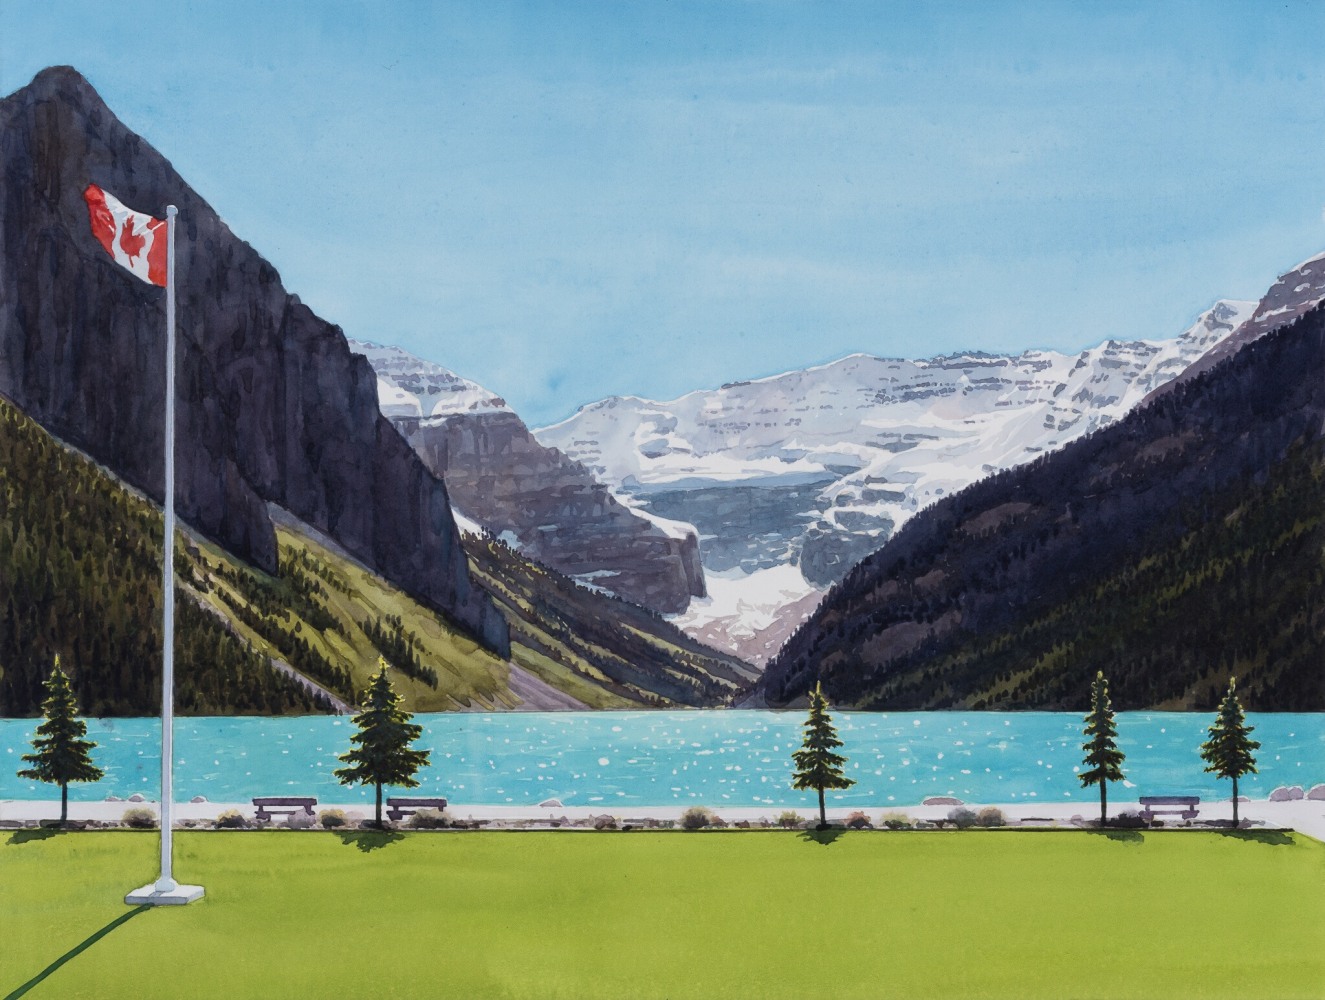 Tim Gardner

Lakeshore, Lake Louise

2021

Watercolor on paper

15 x 19 7/8 inches (38.1 x 50.5 cm)

TG 614

INQUIRE